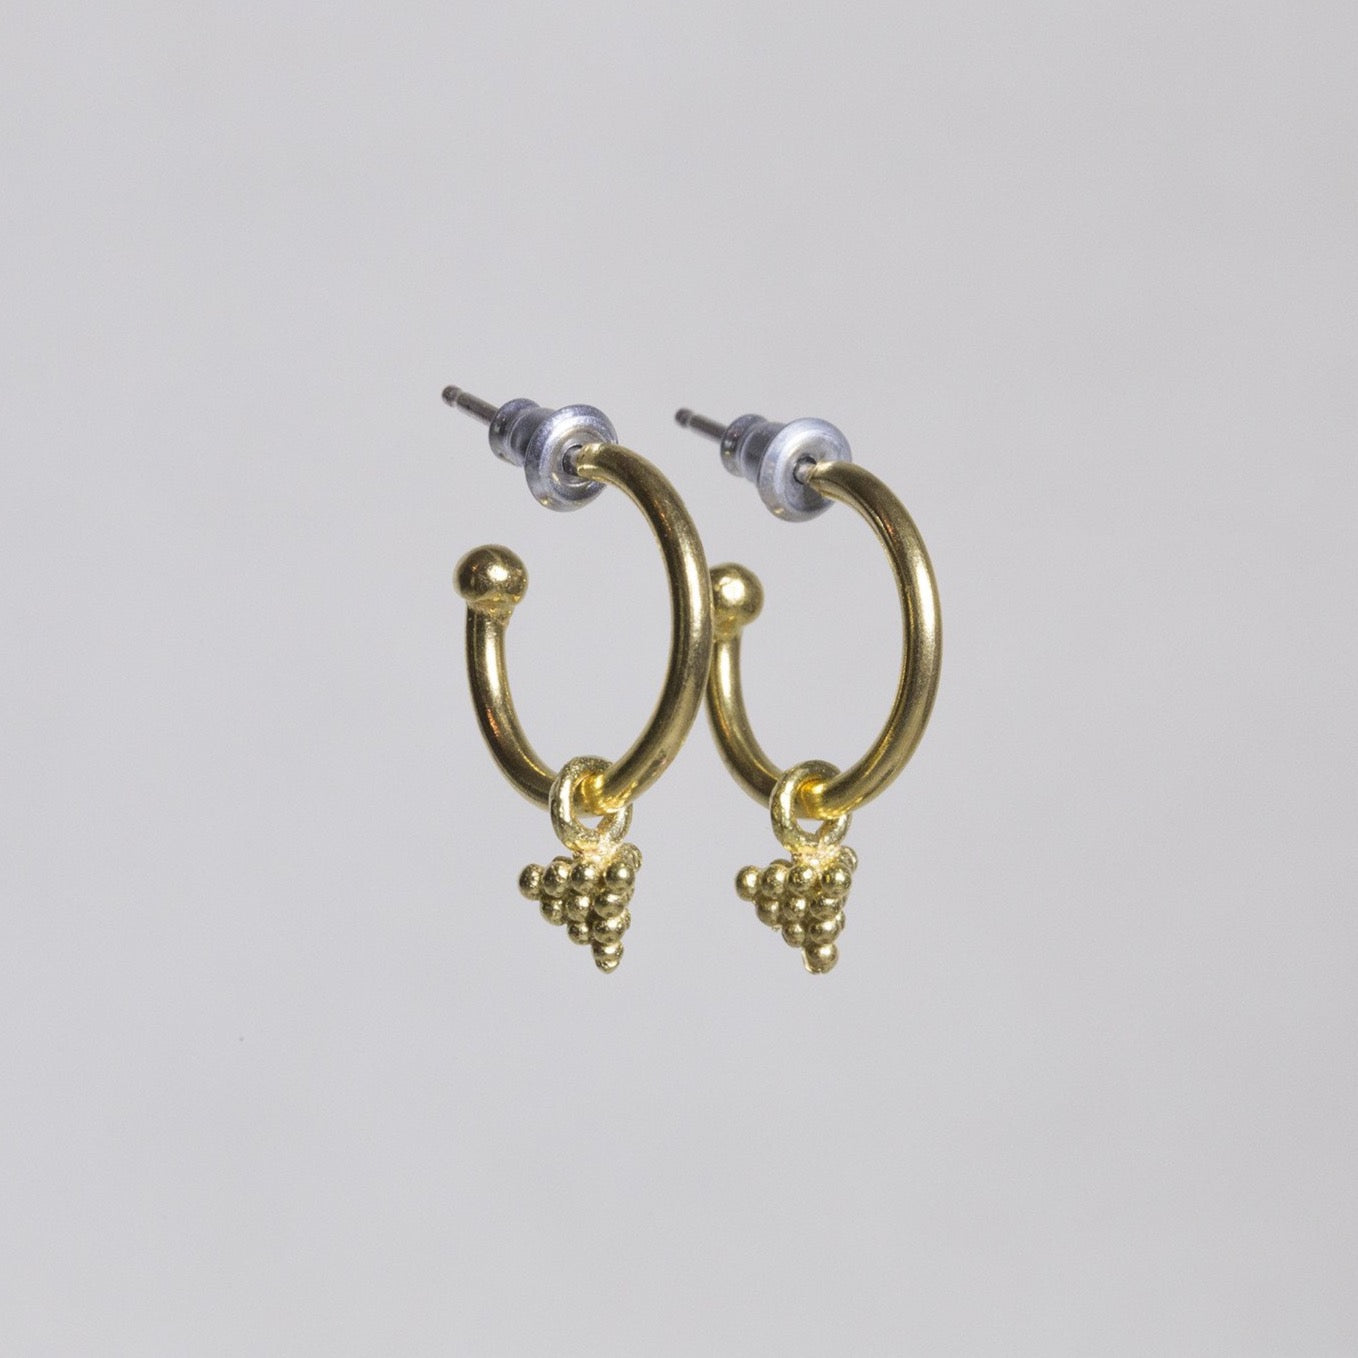 fantastically antique(ish) dotted pyramids charms on hoops